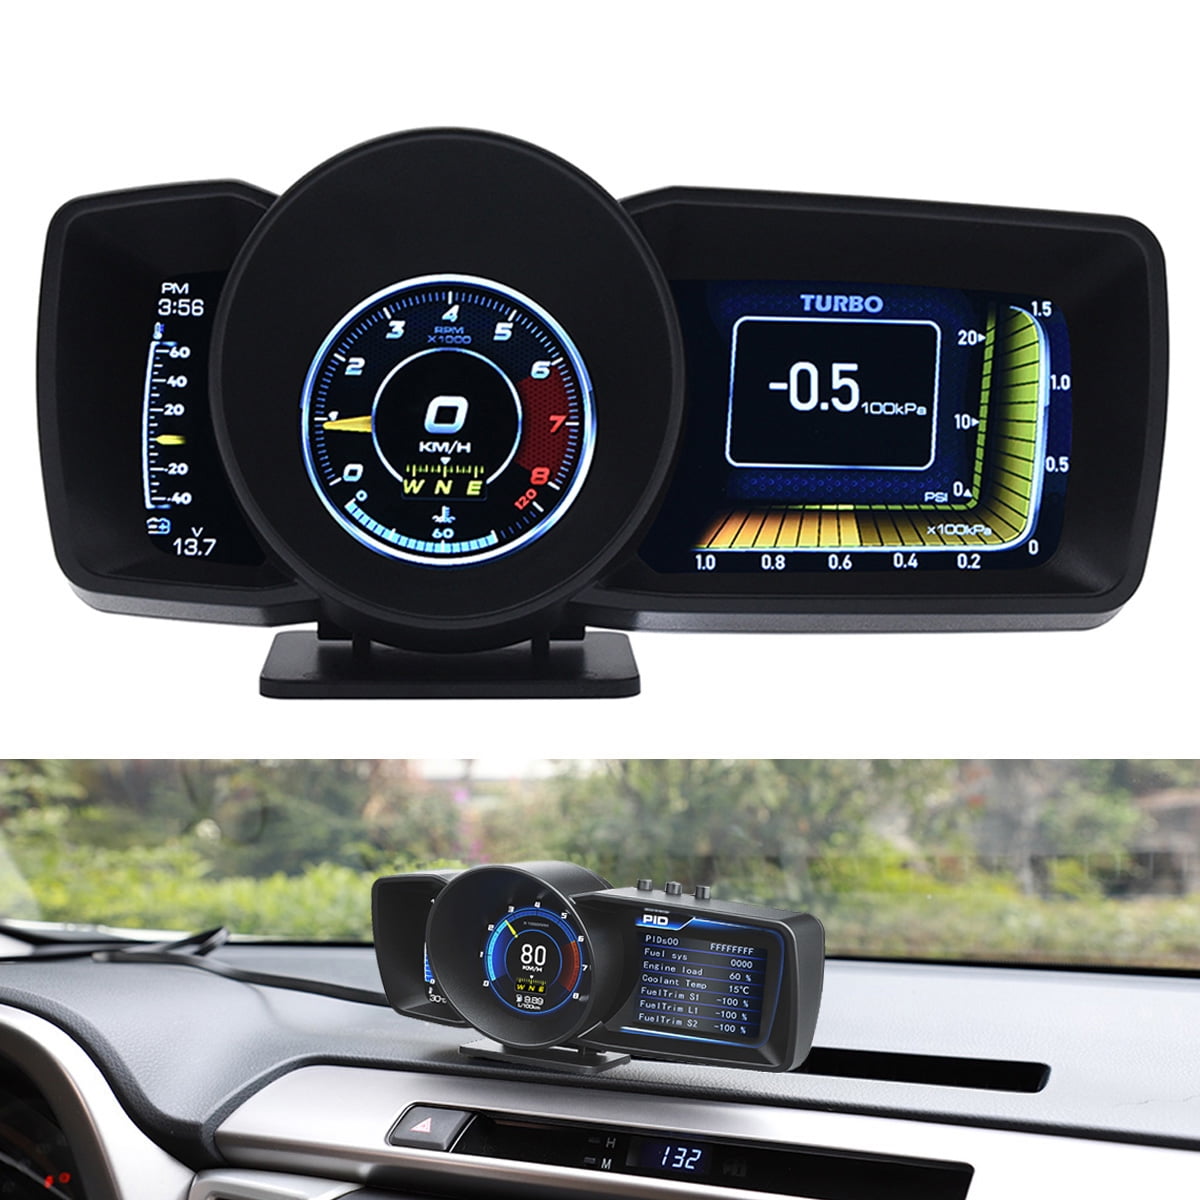  Geloo Car Head Up Display OBD2 HUD Display for Cars A8 Head-up  Display 5.5 inches Digital HUD Speedometer Heads Up Display for Car RV  Truck with OBDII, EUOBD Plug & Play